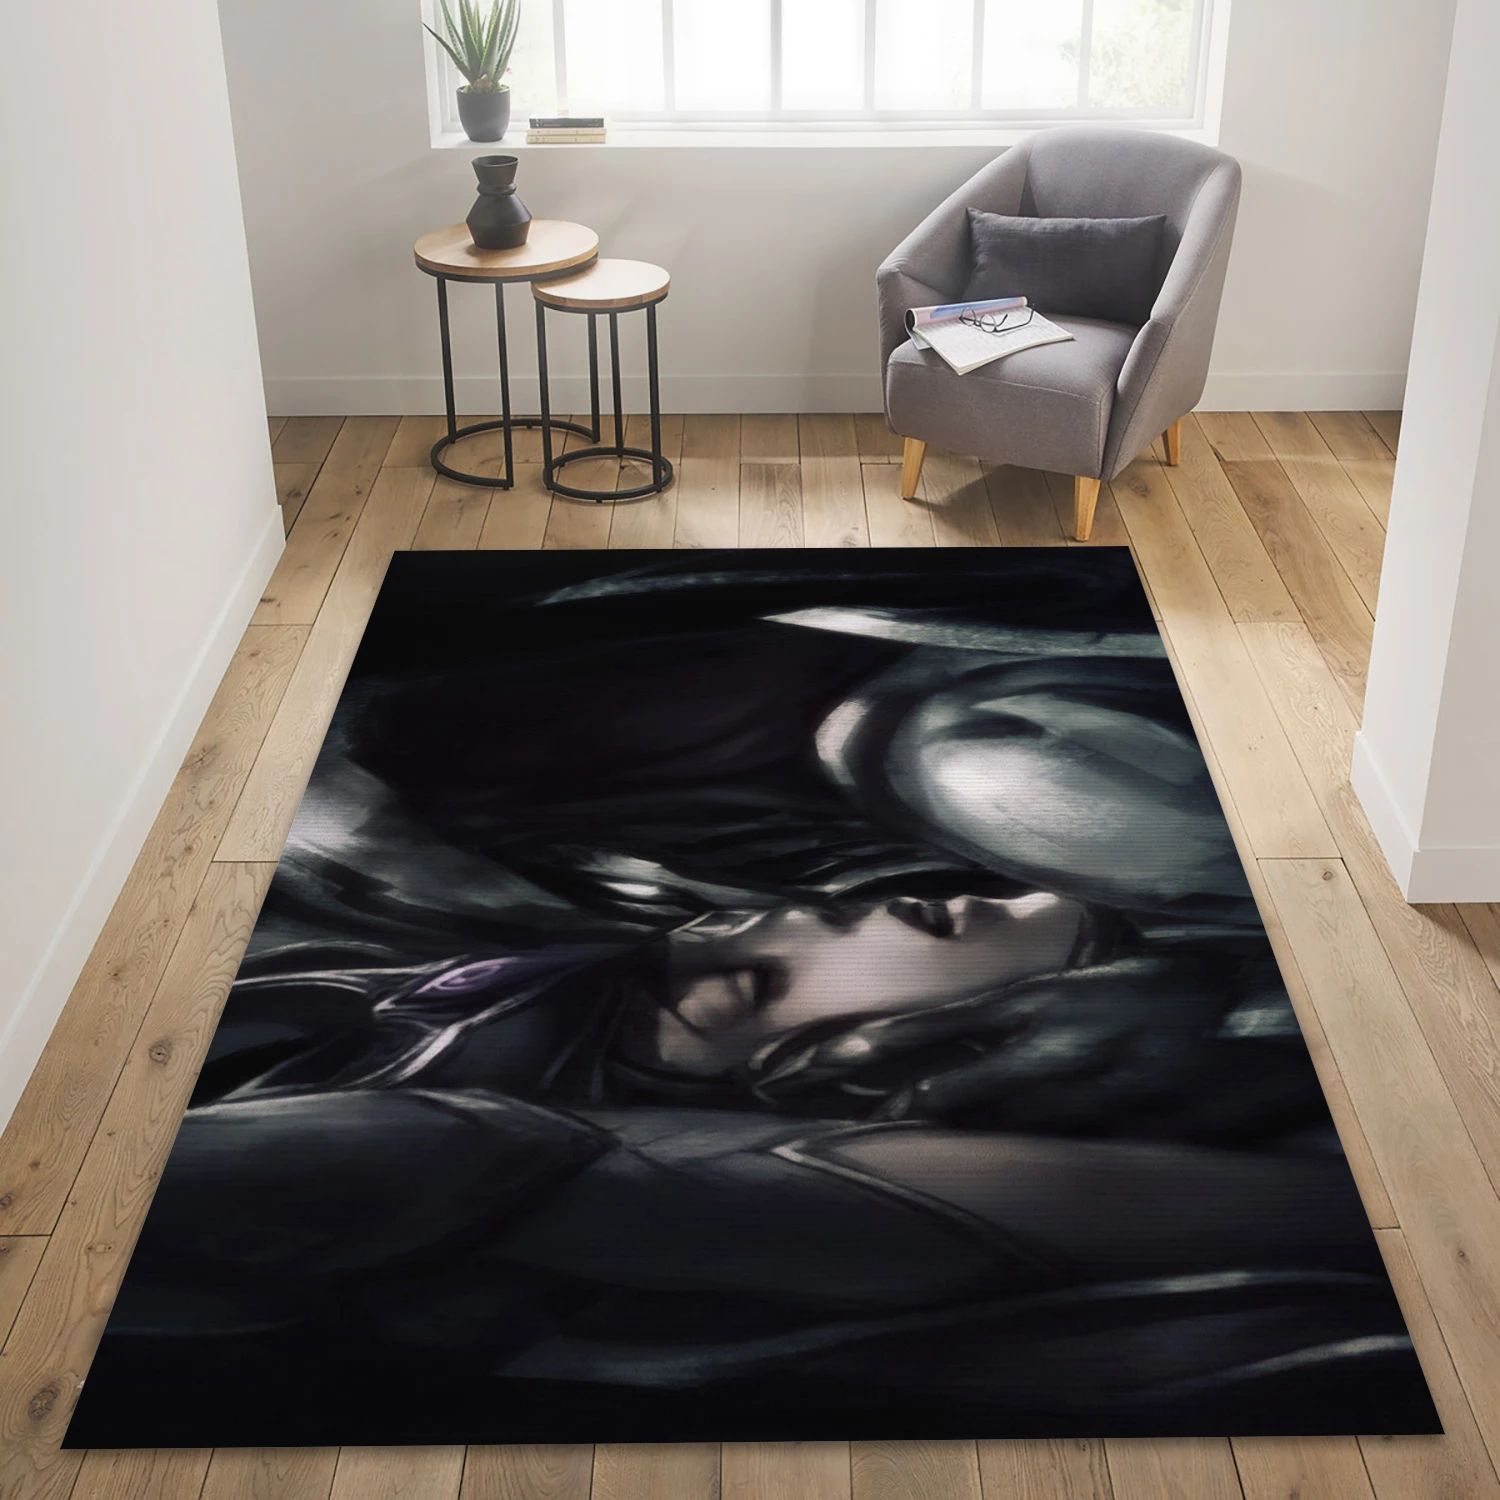 League Of Legends Video Game Area Rug For Christmas, Bedroom Rug - Home Decor Floor Decor - Indoor Outdoor Rugs